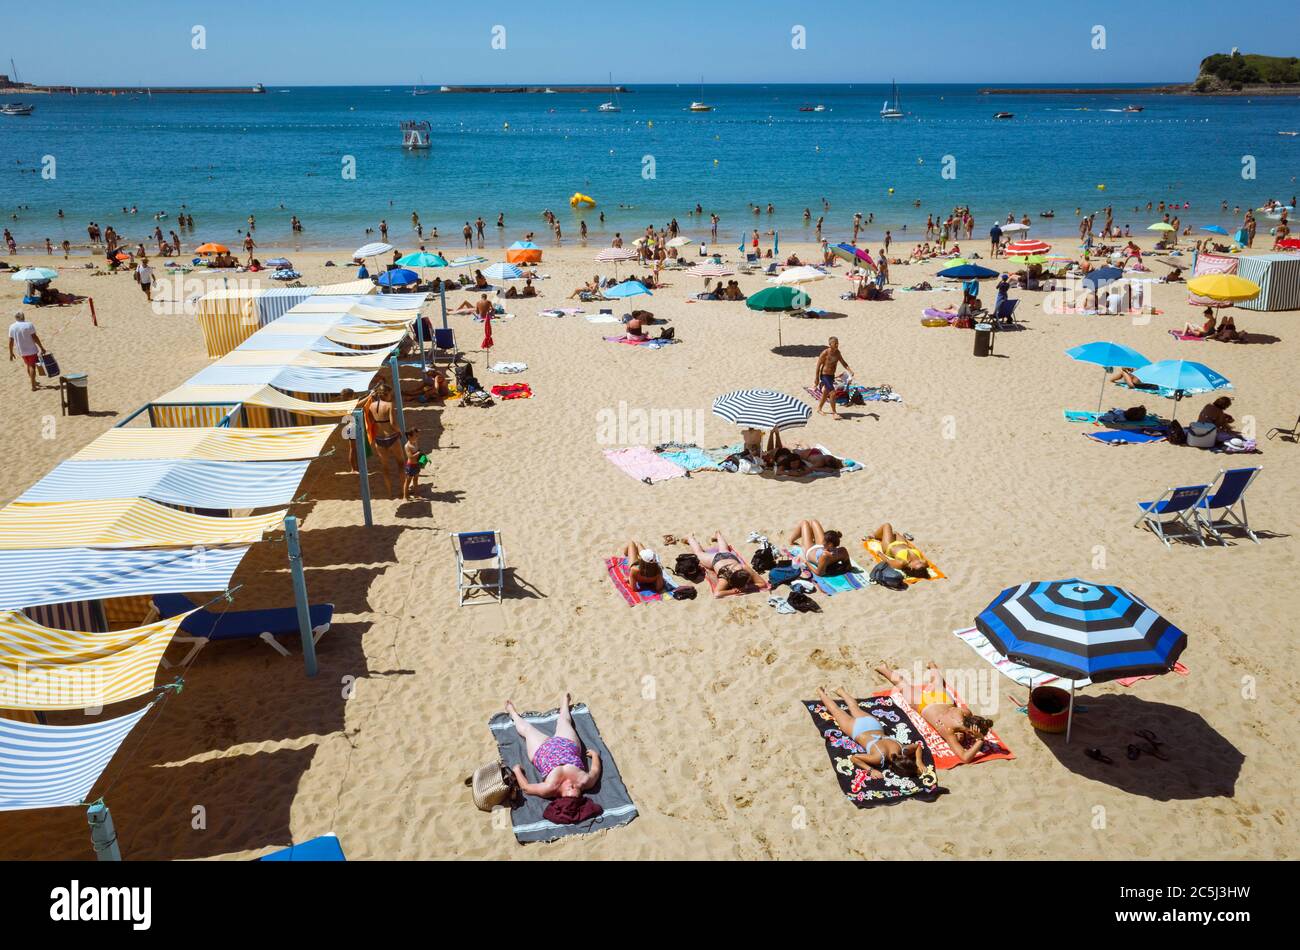 Saint Jean de Luz, French Basque Country, France - July 19th, 2019 : People sunbath on the beach on a sunny summer day. Stock Photo